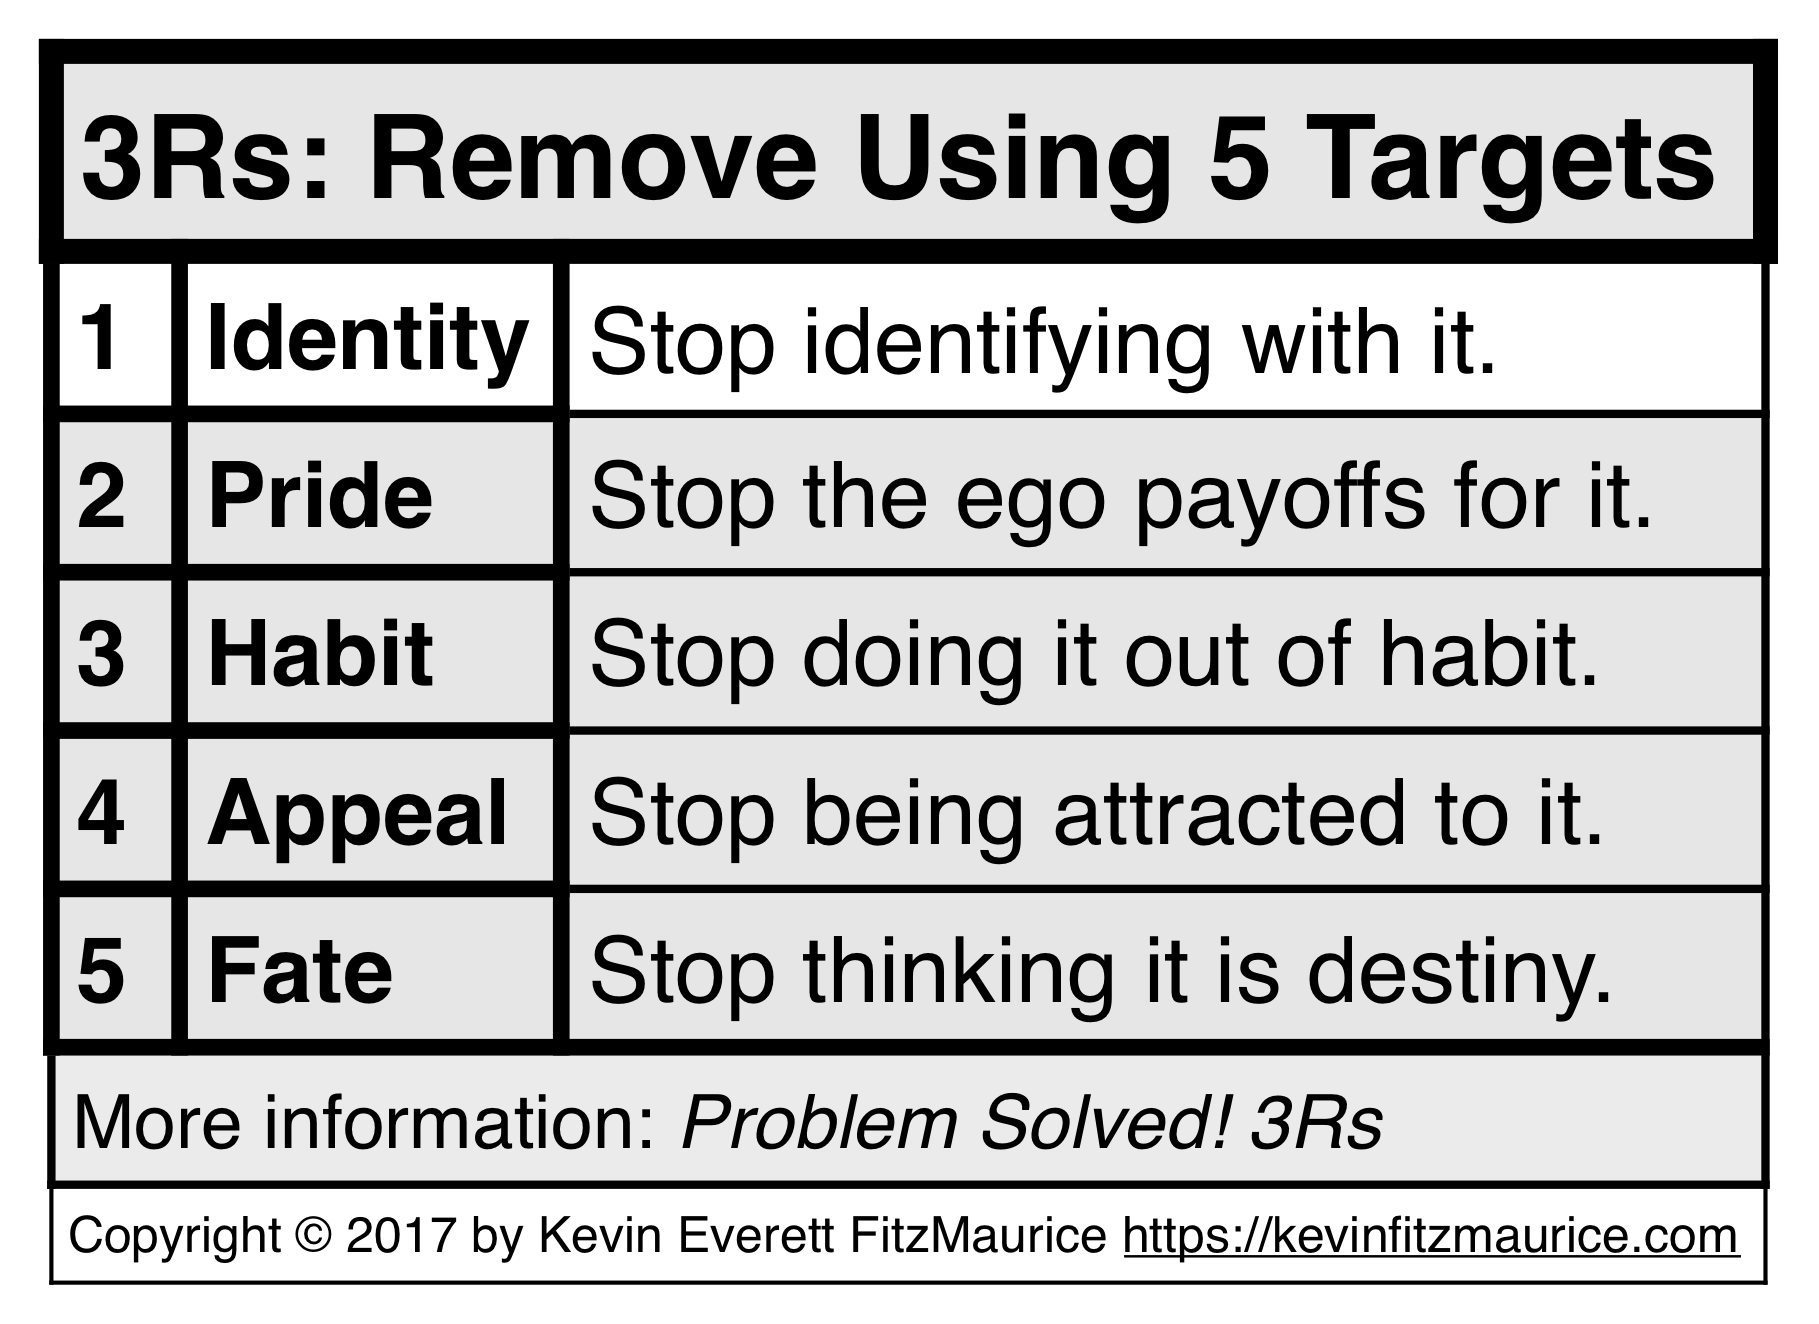 3Rs: Remove Using 5 Targets